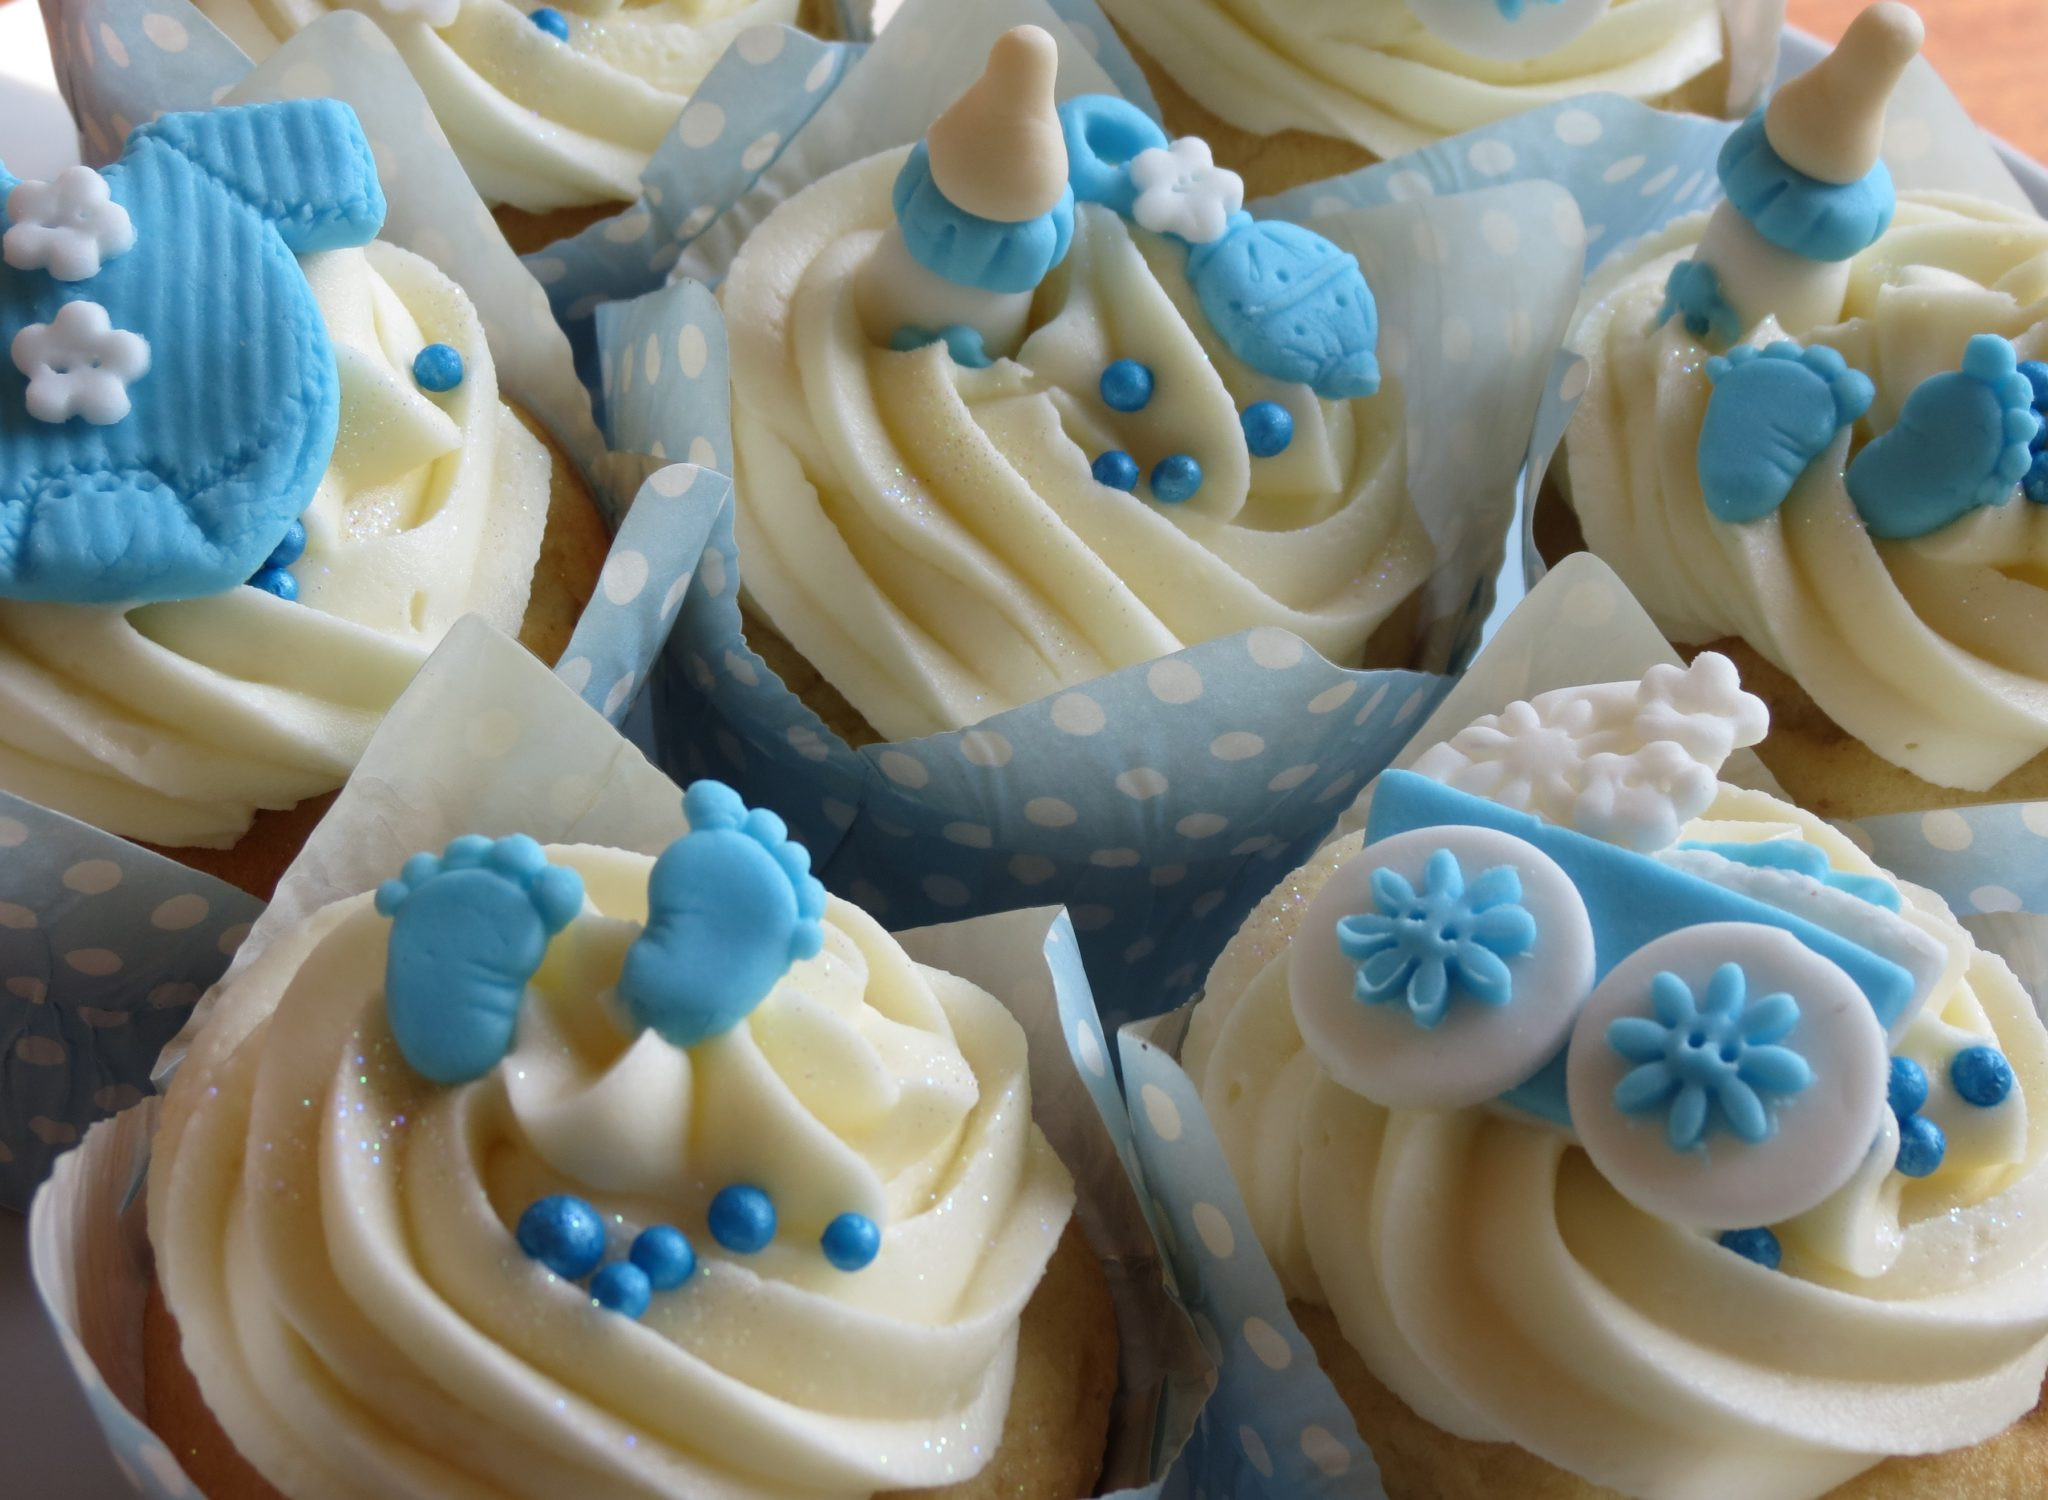 Easy Cake Decorating Ideas For Baby Shower
 70 Baby Shower Cakes and Cupcakes Ideas